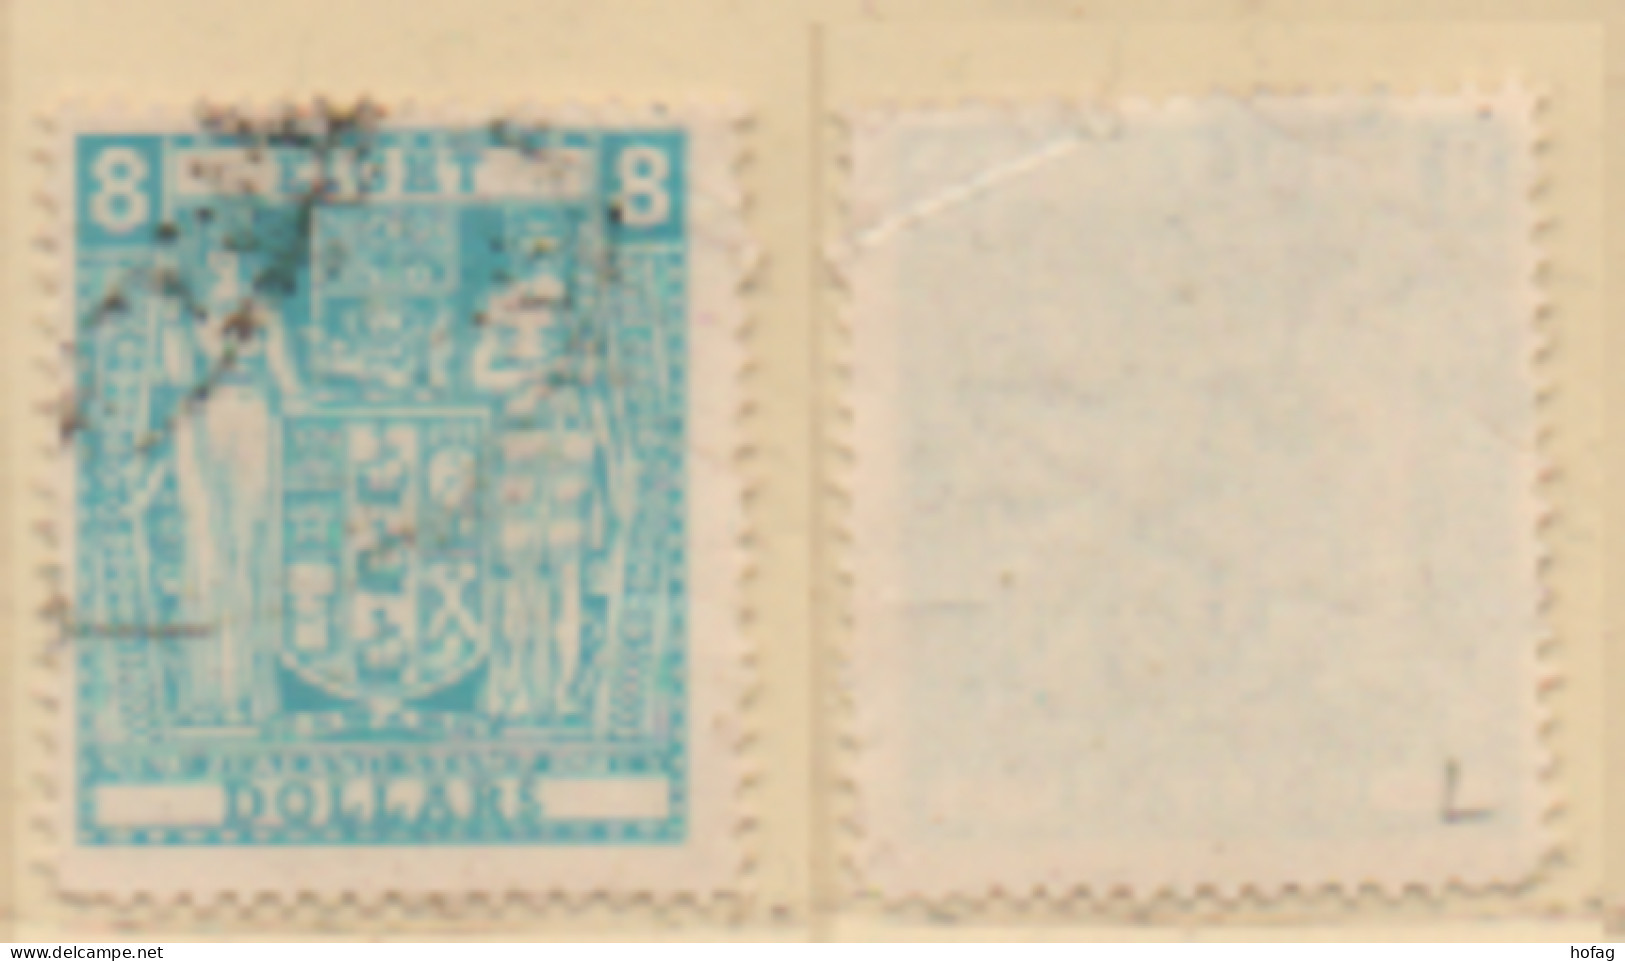 Neuseeland 1946 MiNr.: St84C Stempelmarke Gestempelt New Zealand Stamp Duty Used Yt: FP72 Sg: F221 - Postal Fiscal Stamps